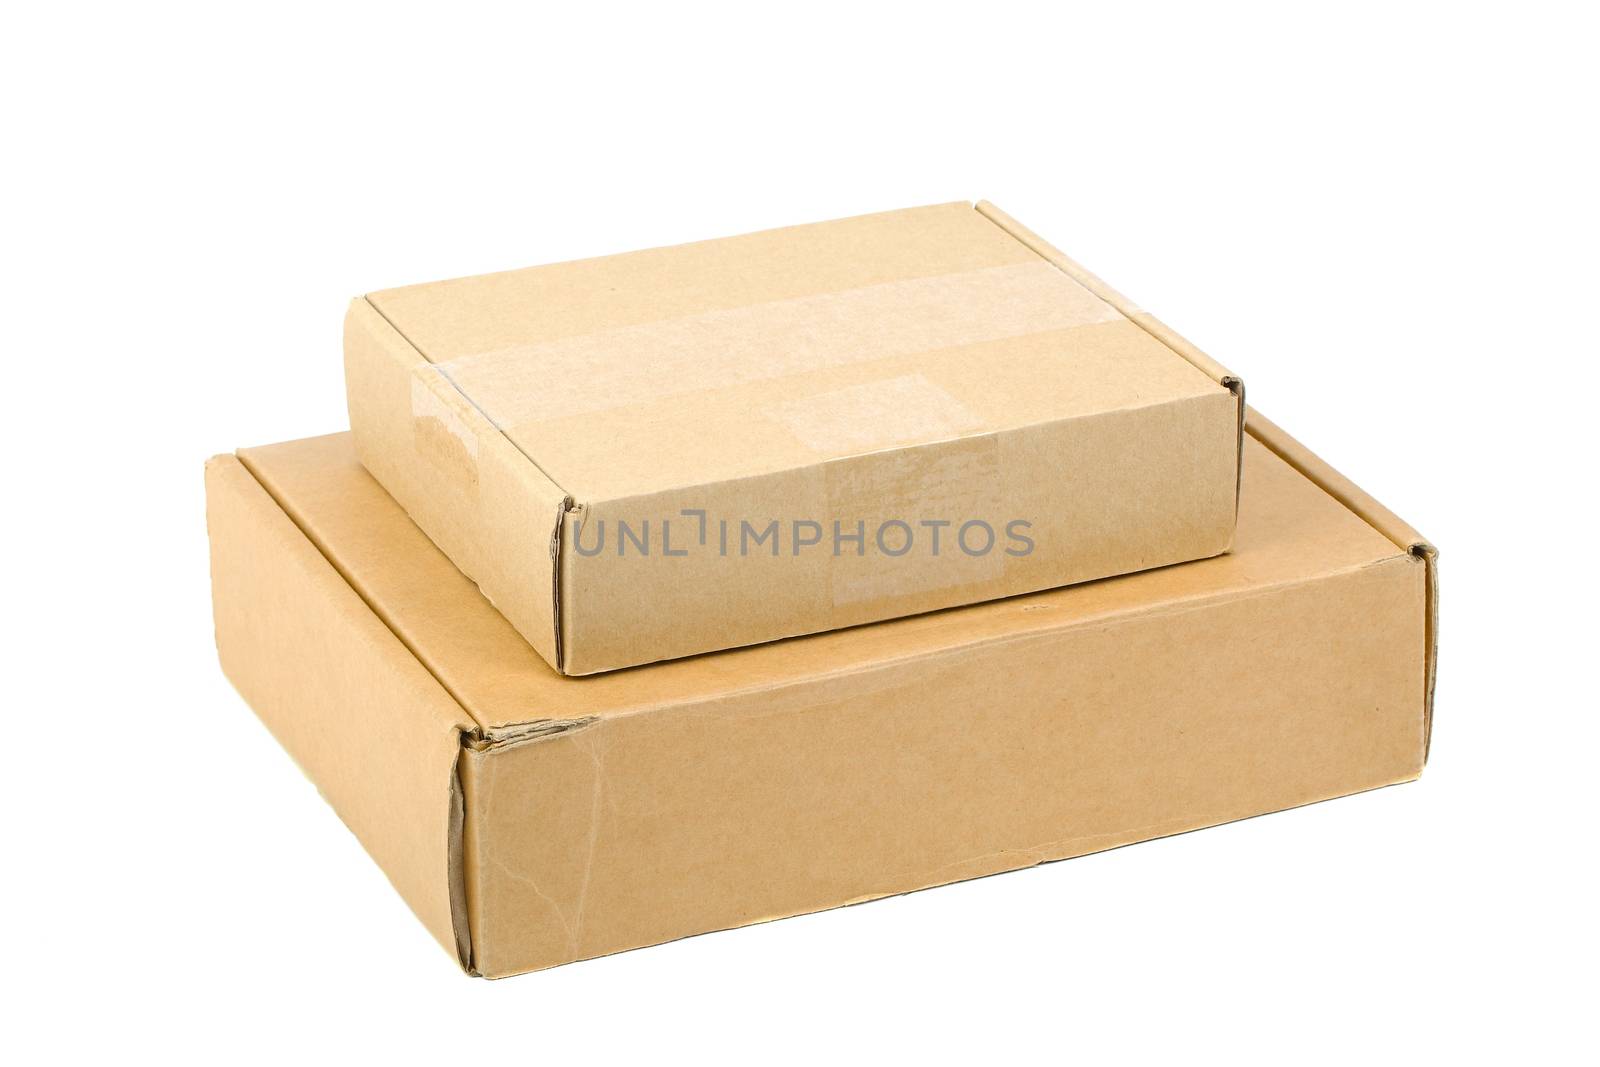 Open cardboard box isolated on white